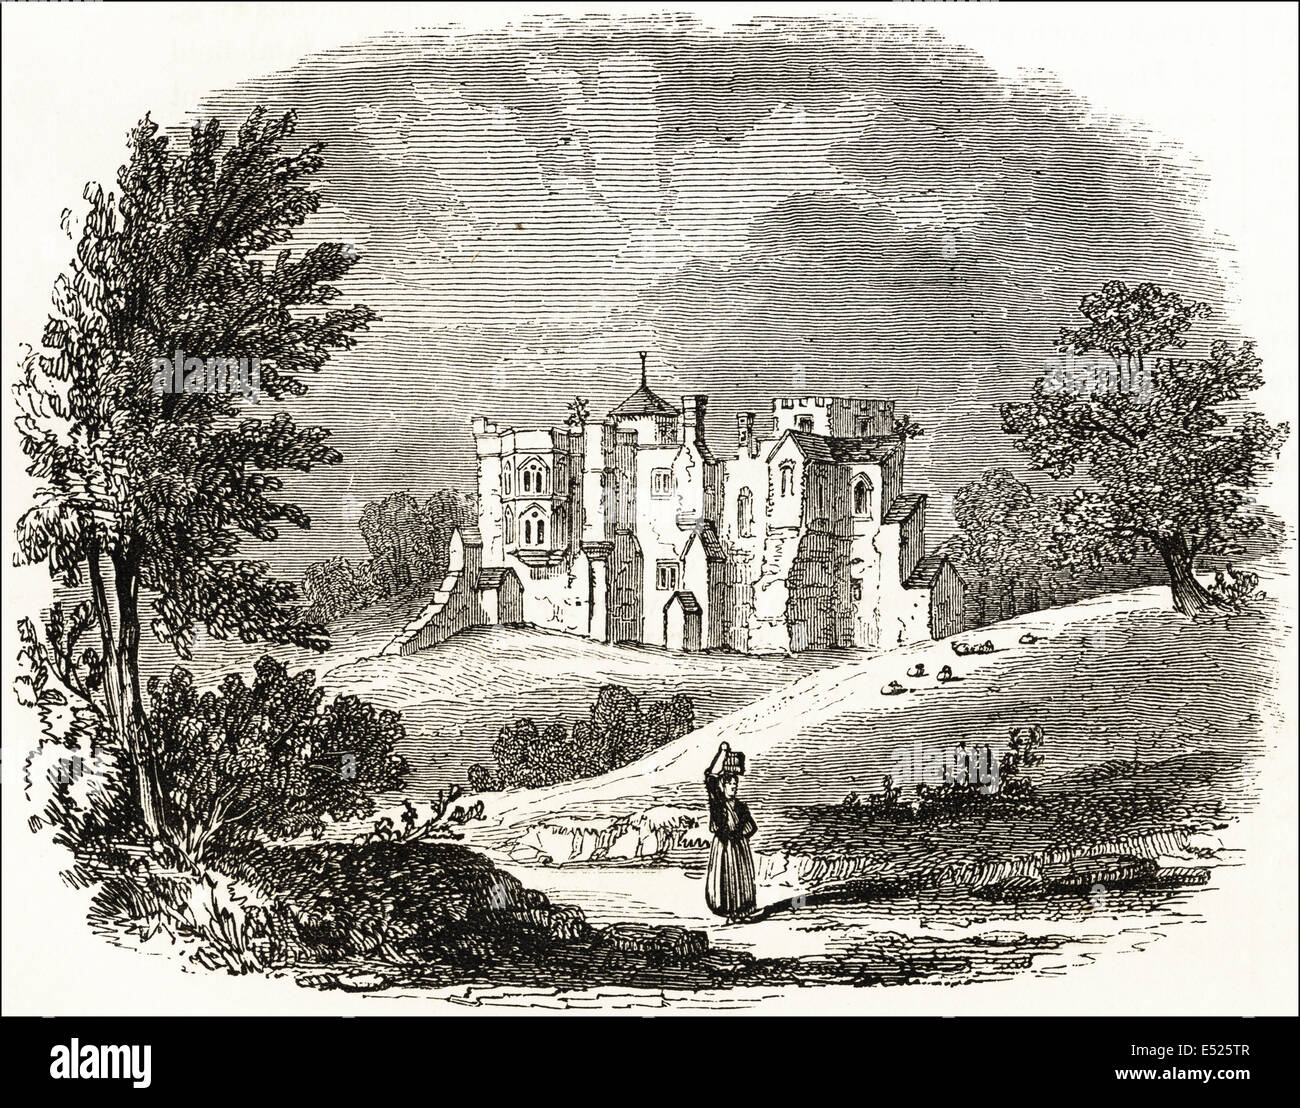 Woodstock Palace, Oxfordshire as it appeared before 1714, built in the 12th century and demolished in 1720. Victorian woodcut engraving circa 1845. Stock Photo